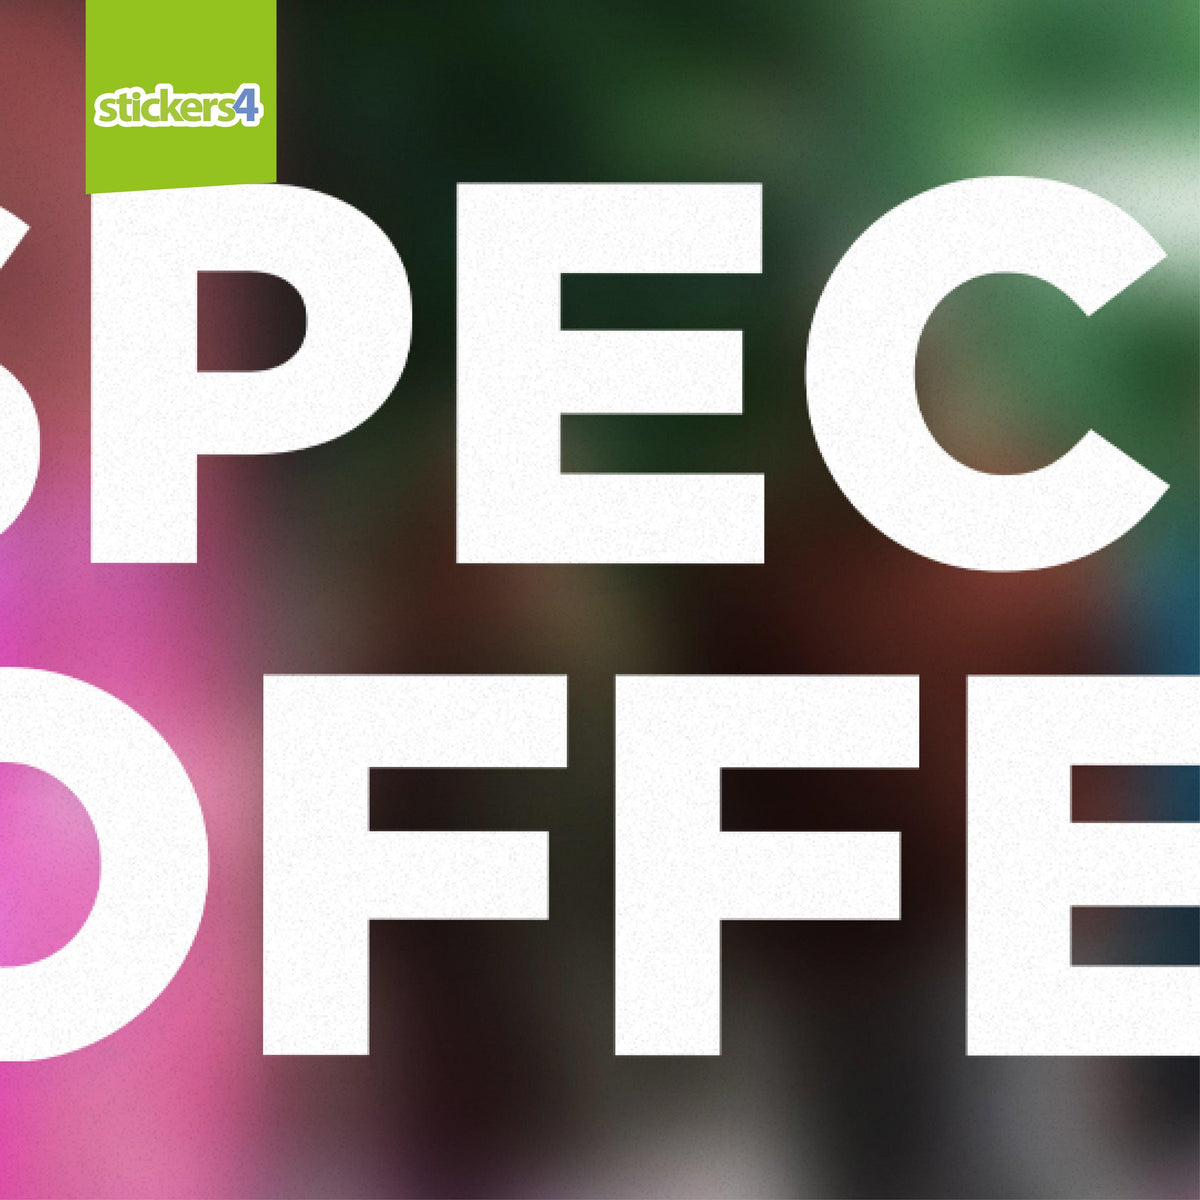 Large SPECIAL OFFERS Shop Window Sticker - White on Clear Promotions